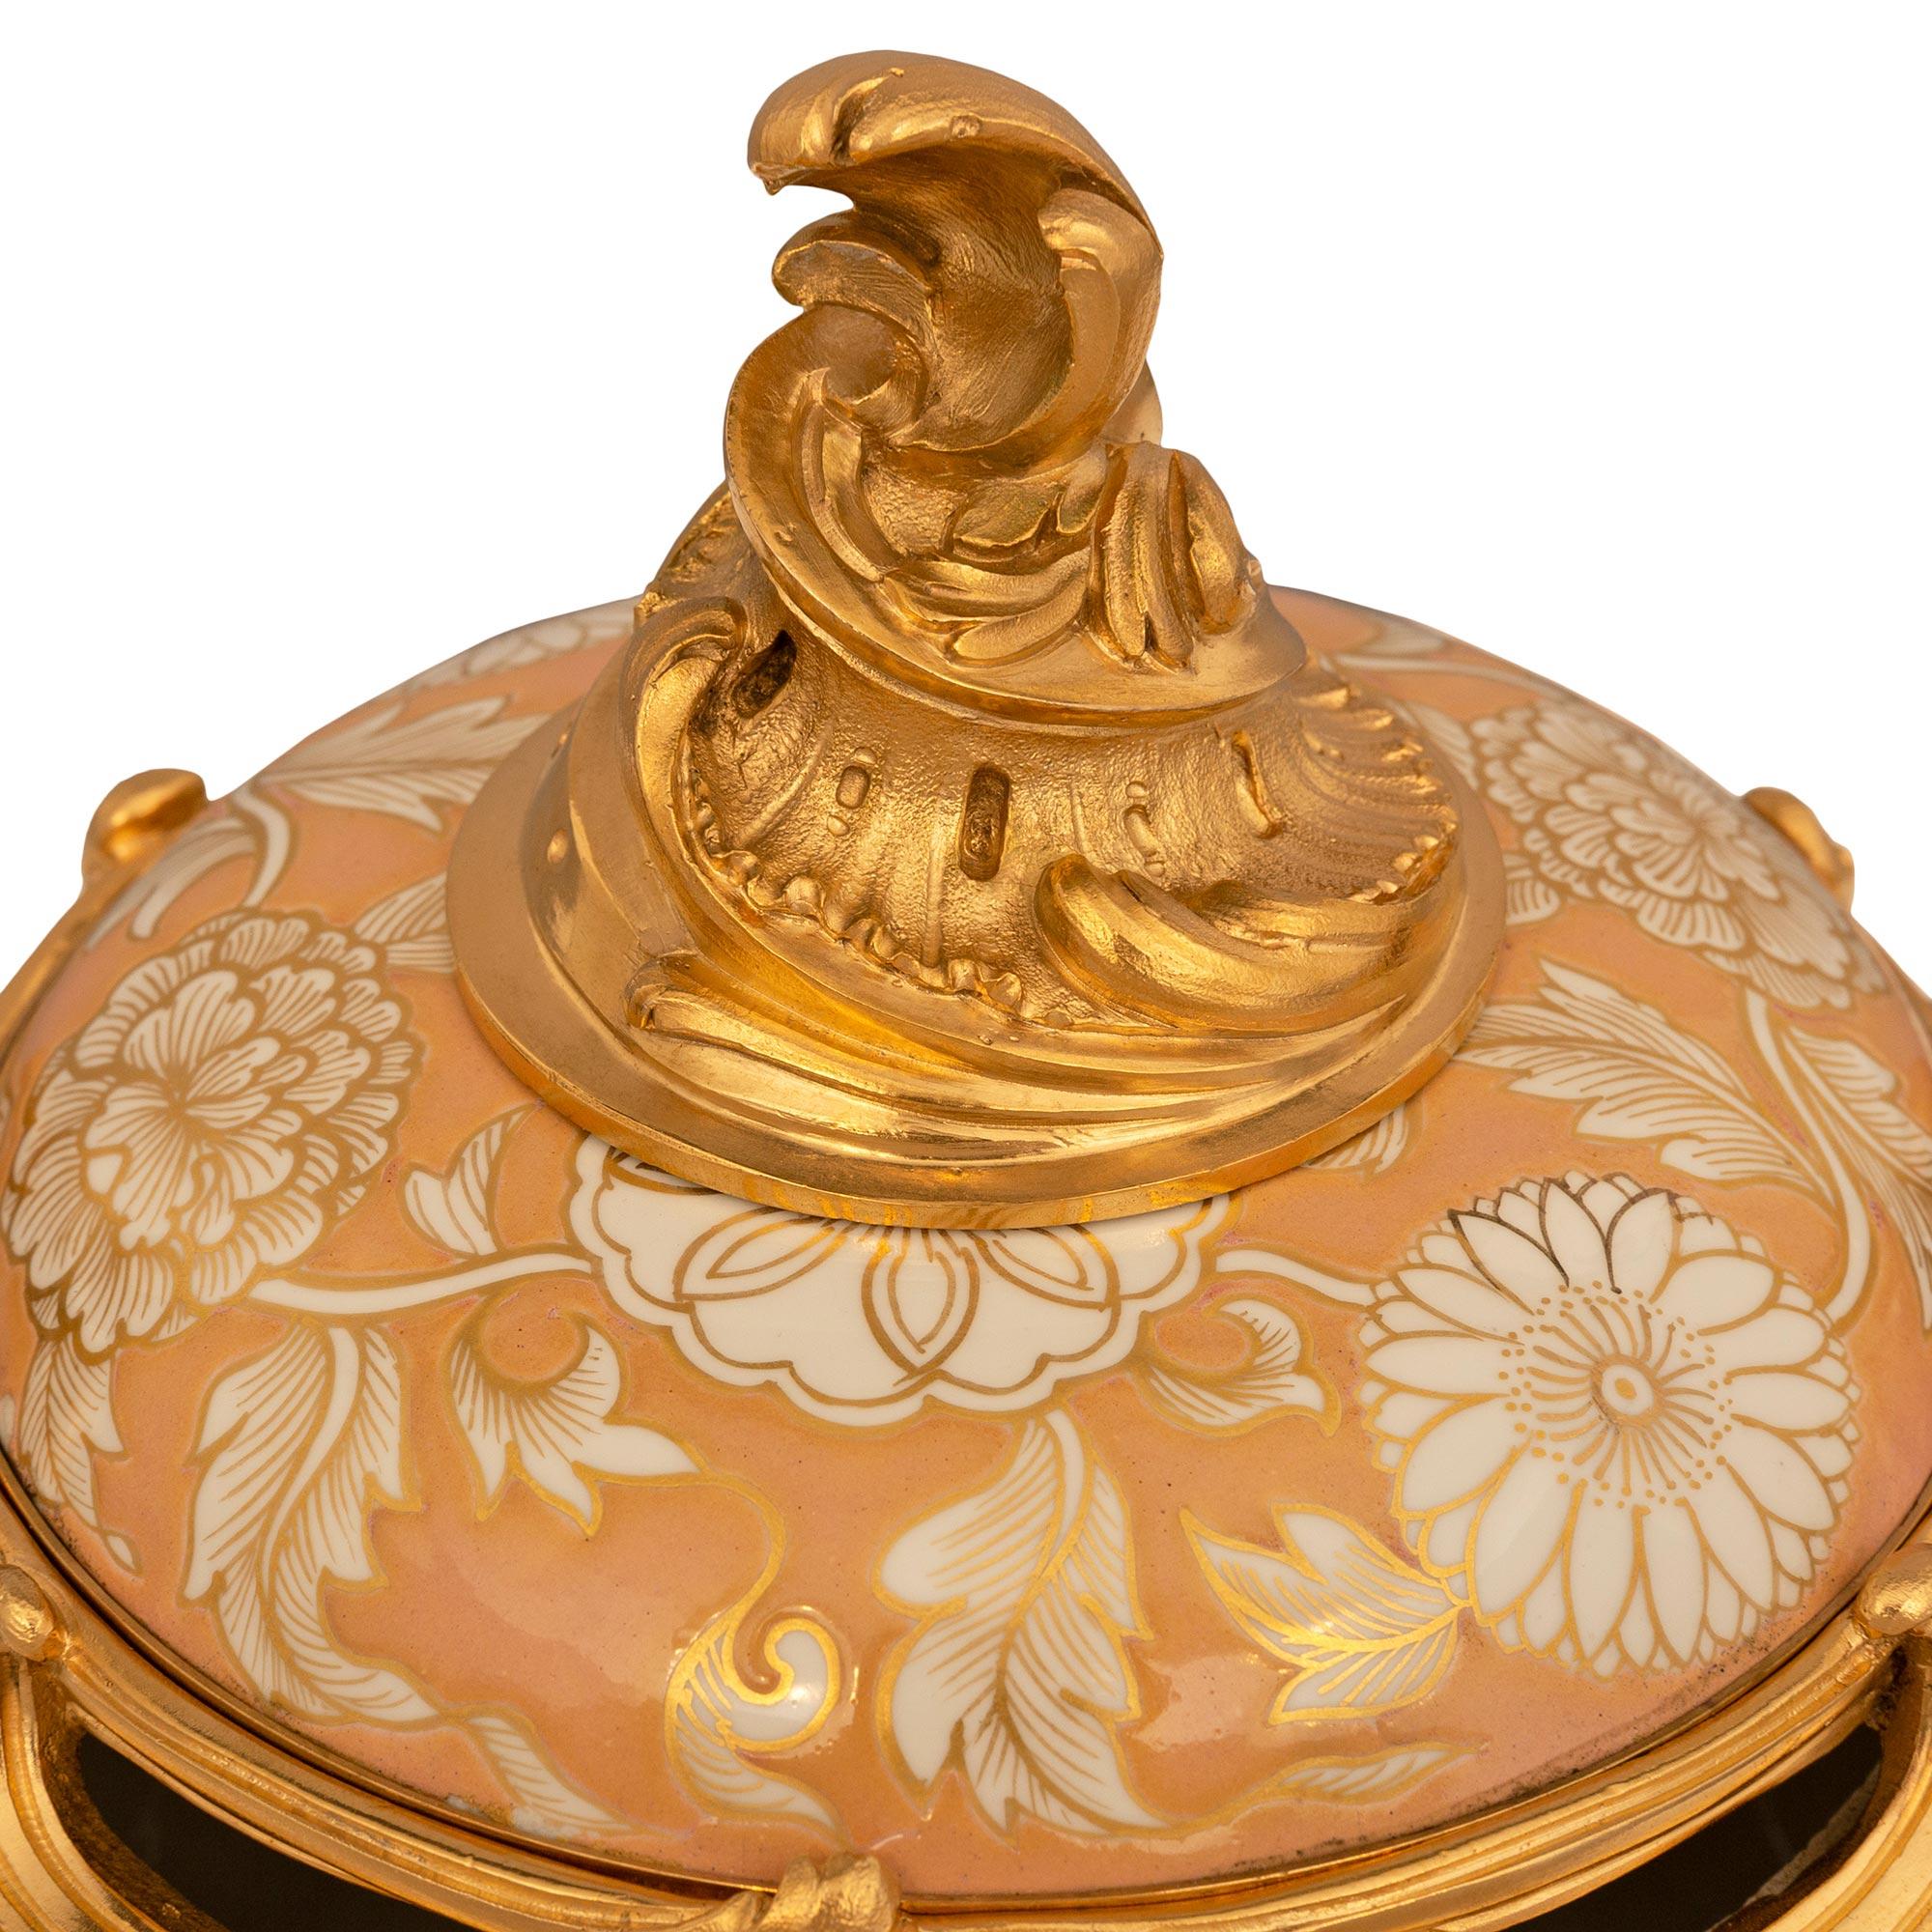 French 19th Century Louis XV St. Chinese Export Porcelain And Ormolu Lidded Urn For Sale 2